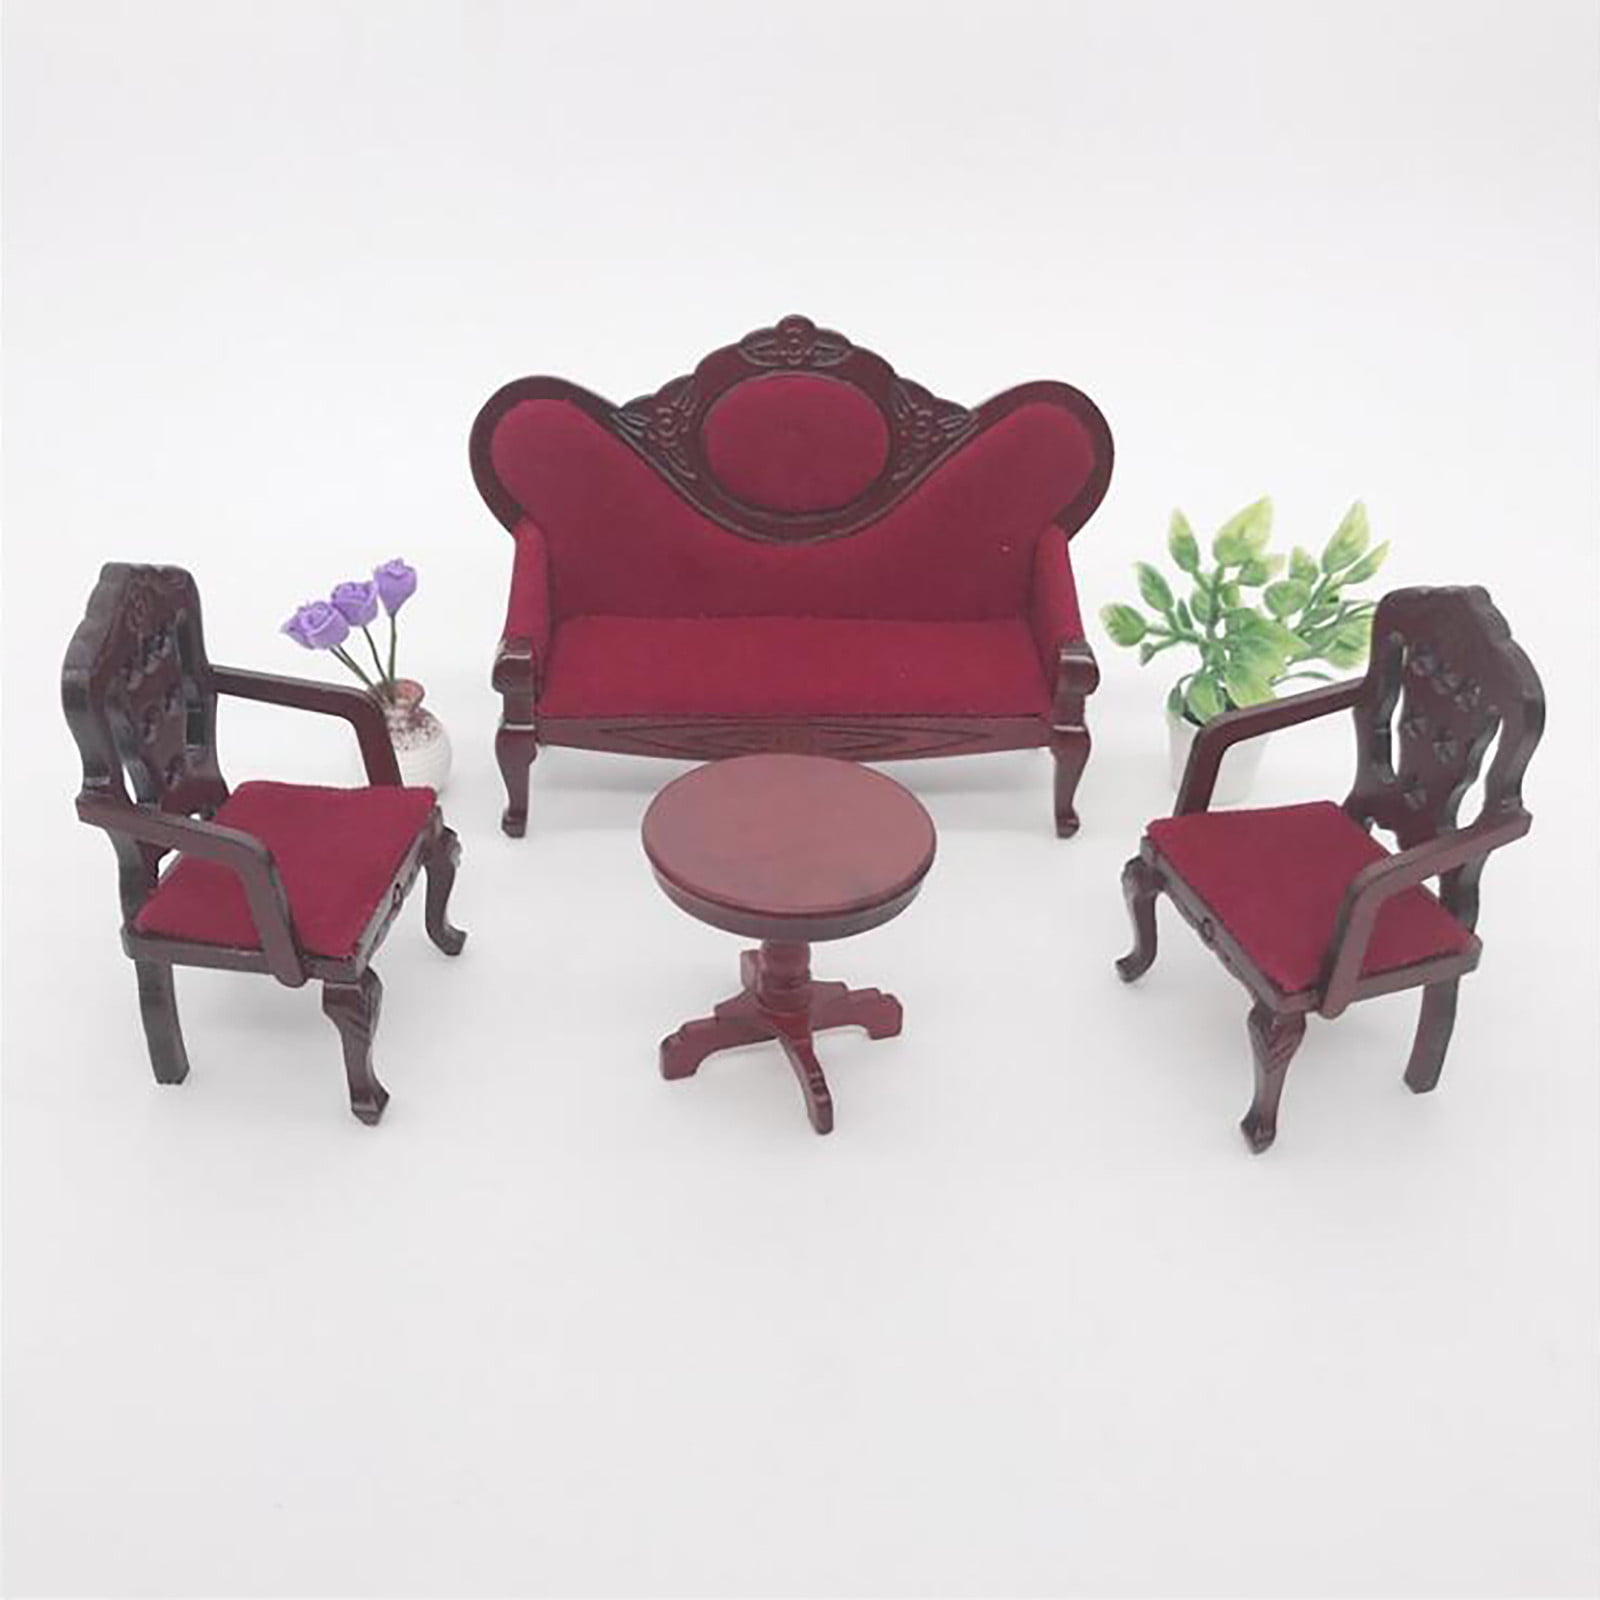 Miniature Dollhouse Victorian Gent's Chair Mahogany Floral Fabric 1:12 Scale New 